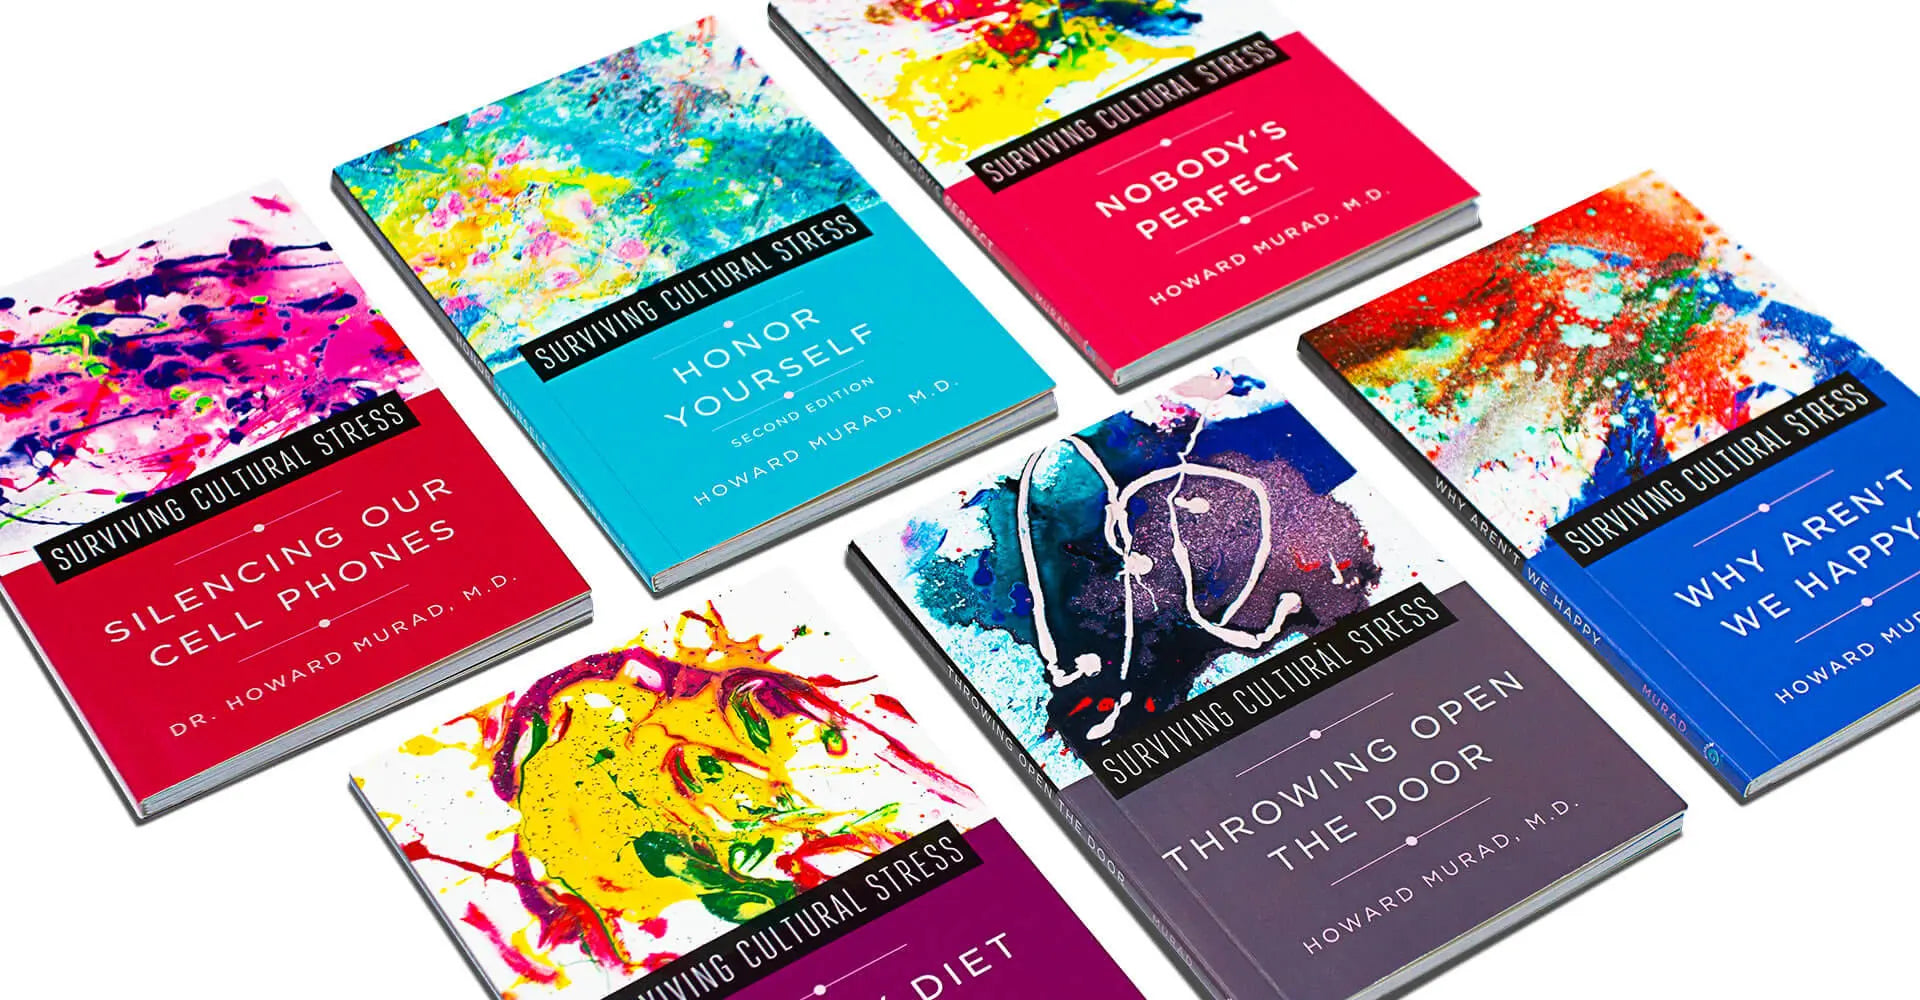 a group of colorful books